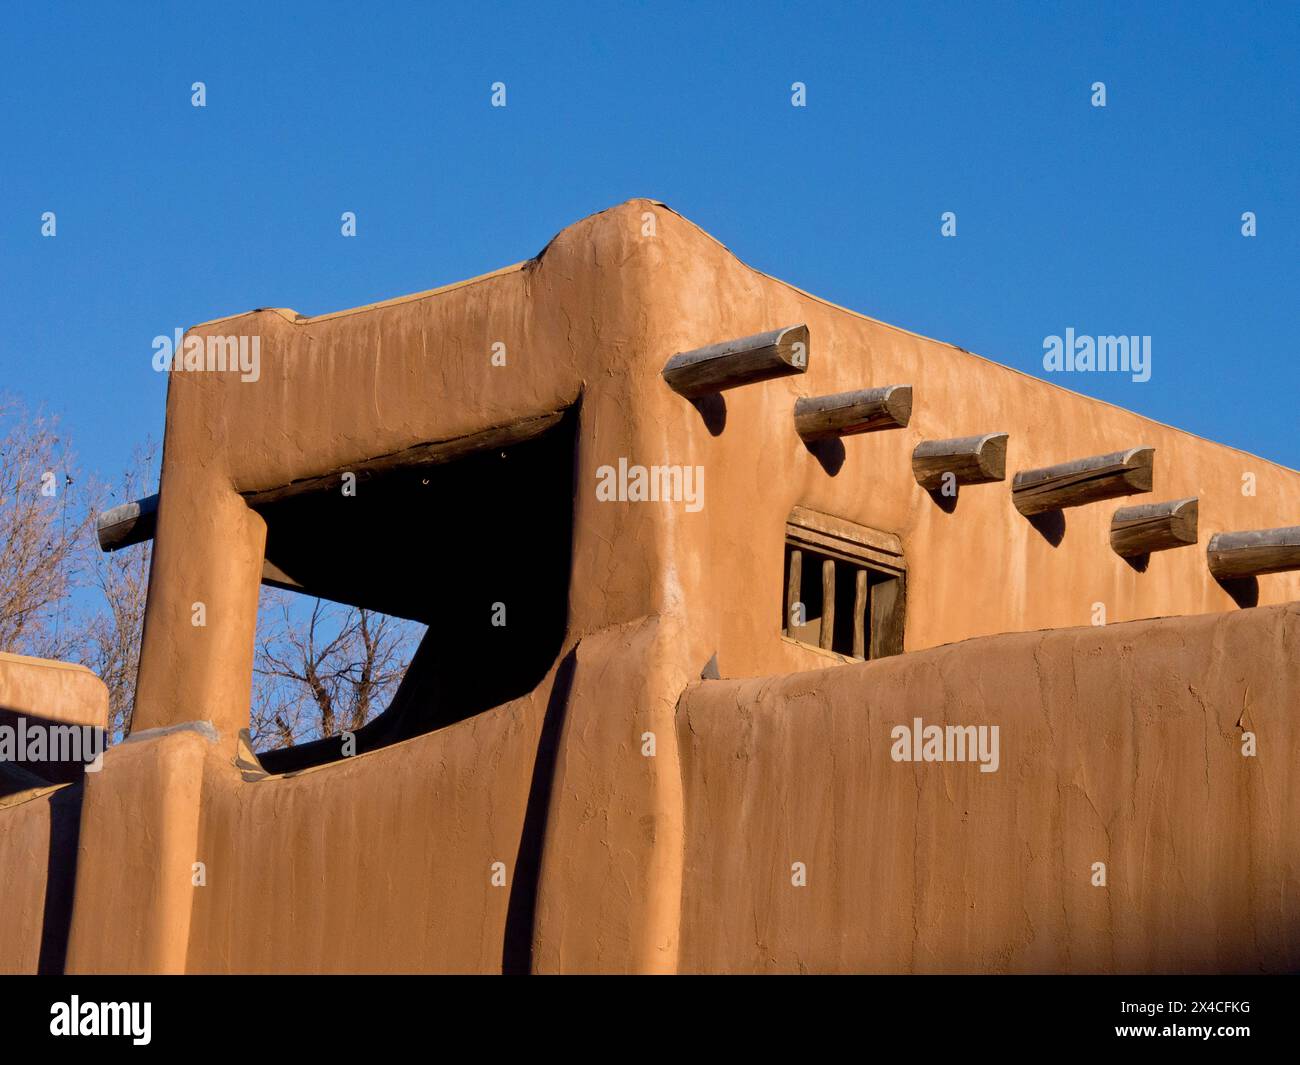 USA, New Mexico, Sante Fe. Southwest architecture, part of a earth colored adobe house in Santa Fe. Stock Photo